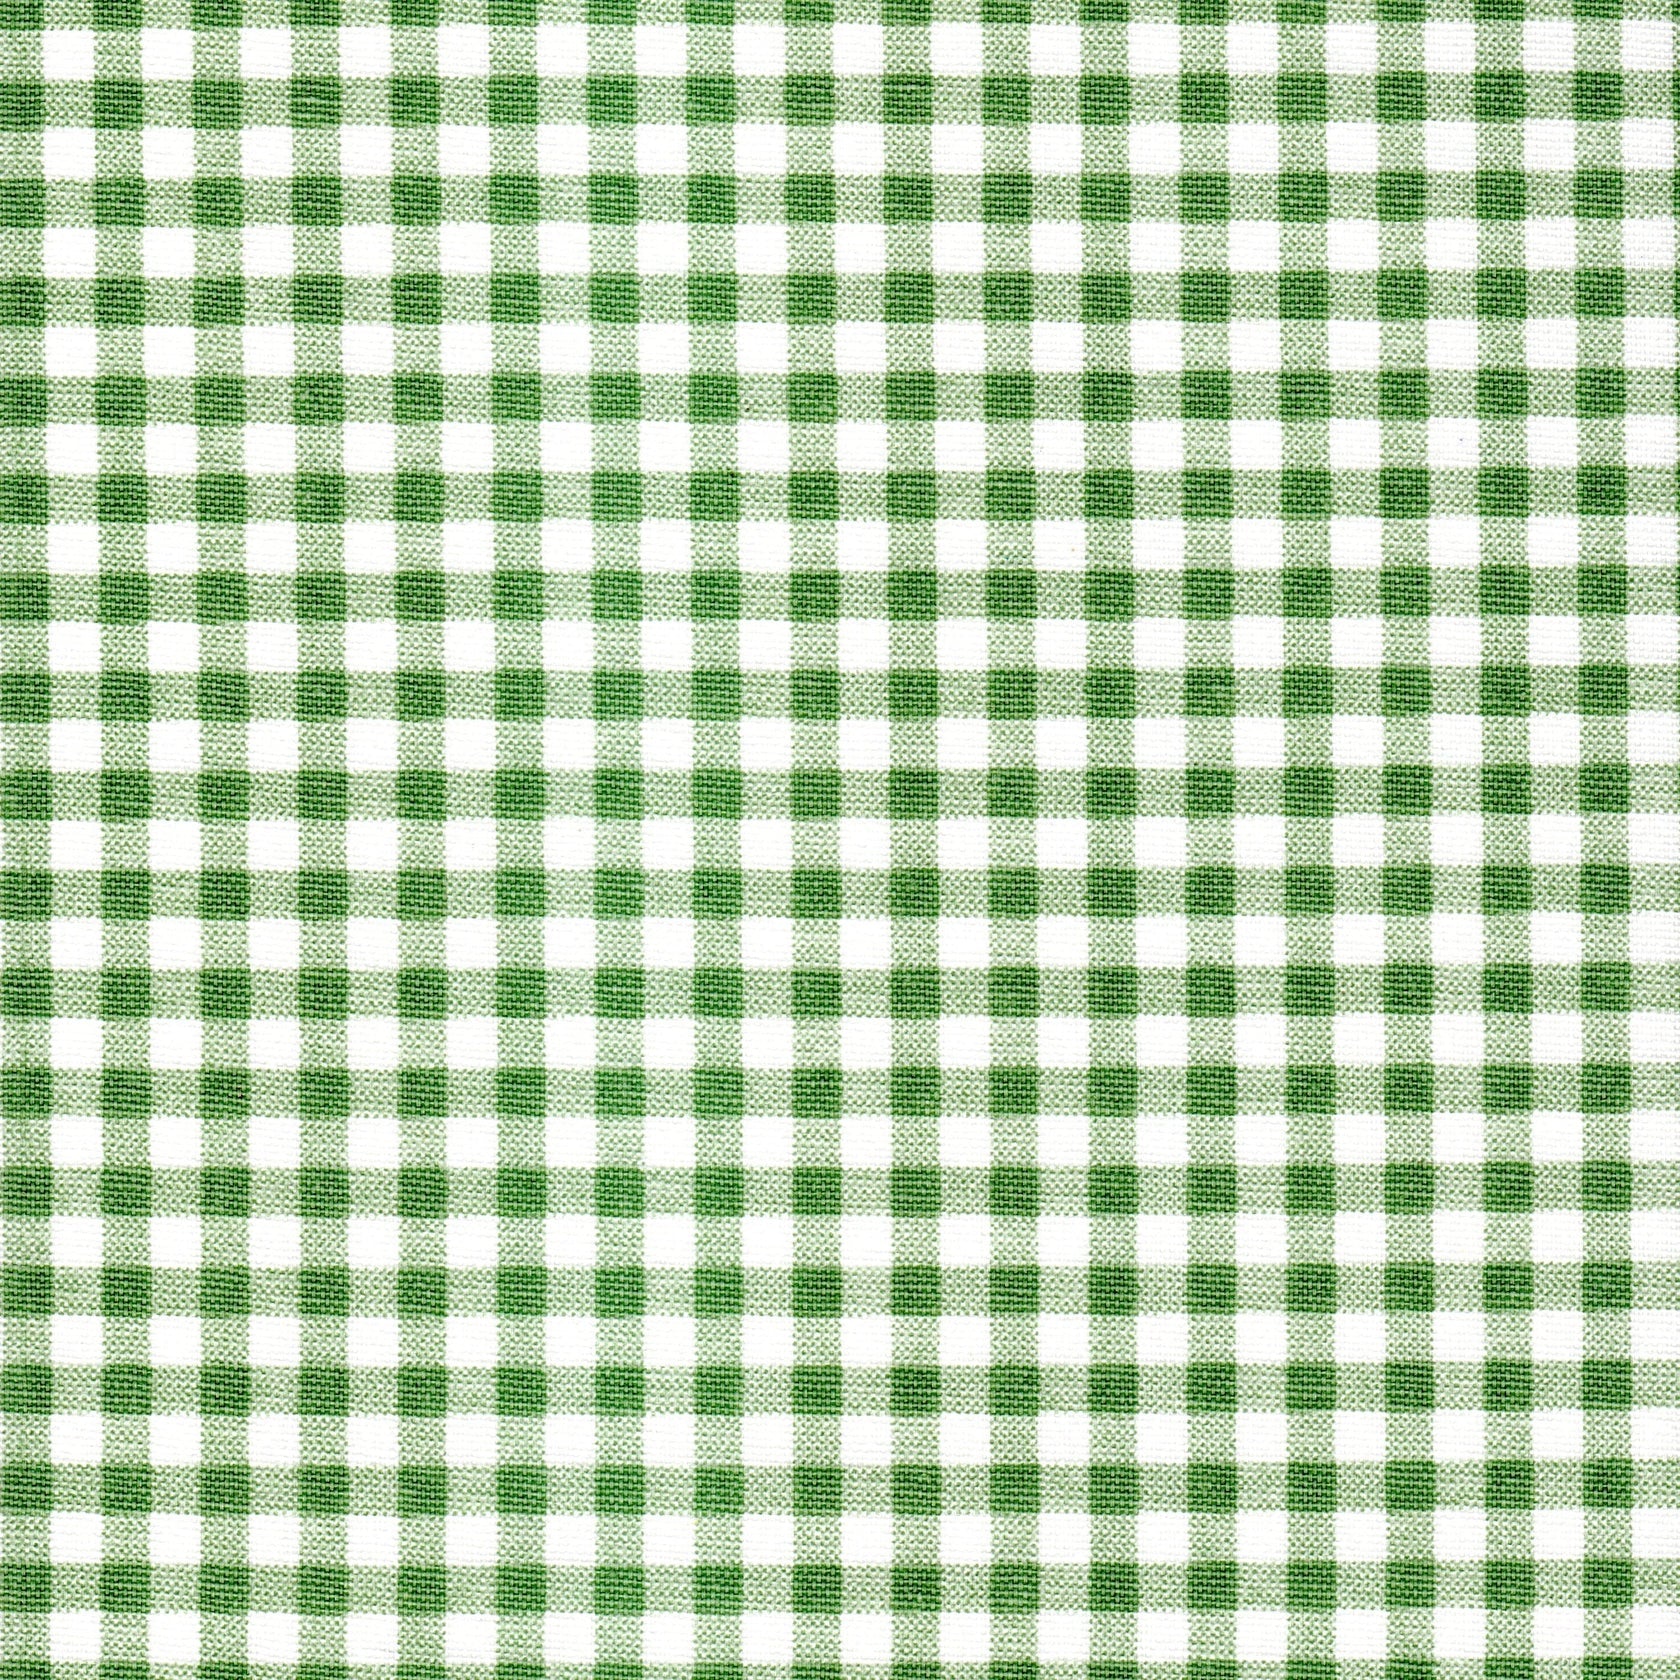 Pinch Pleated Curtains in Sage Green Large Gingham Check on White